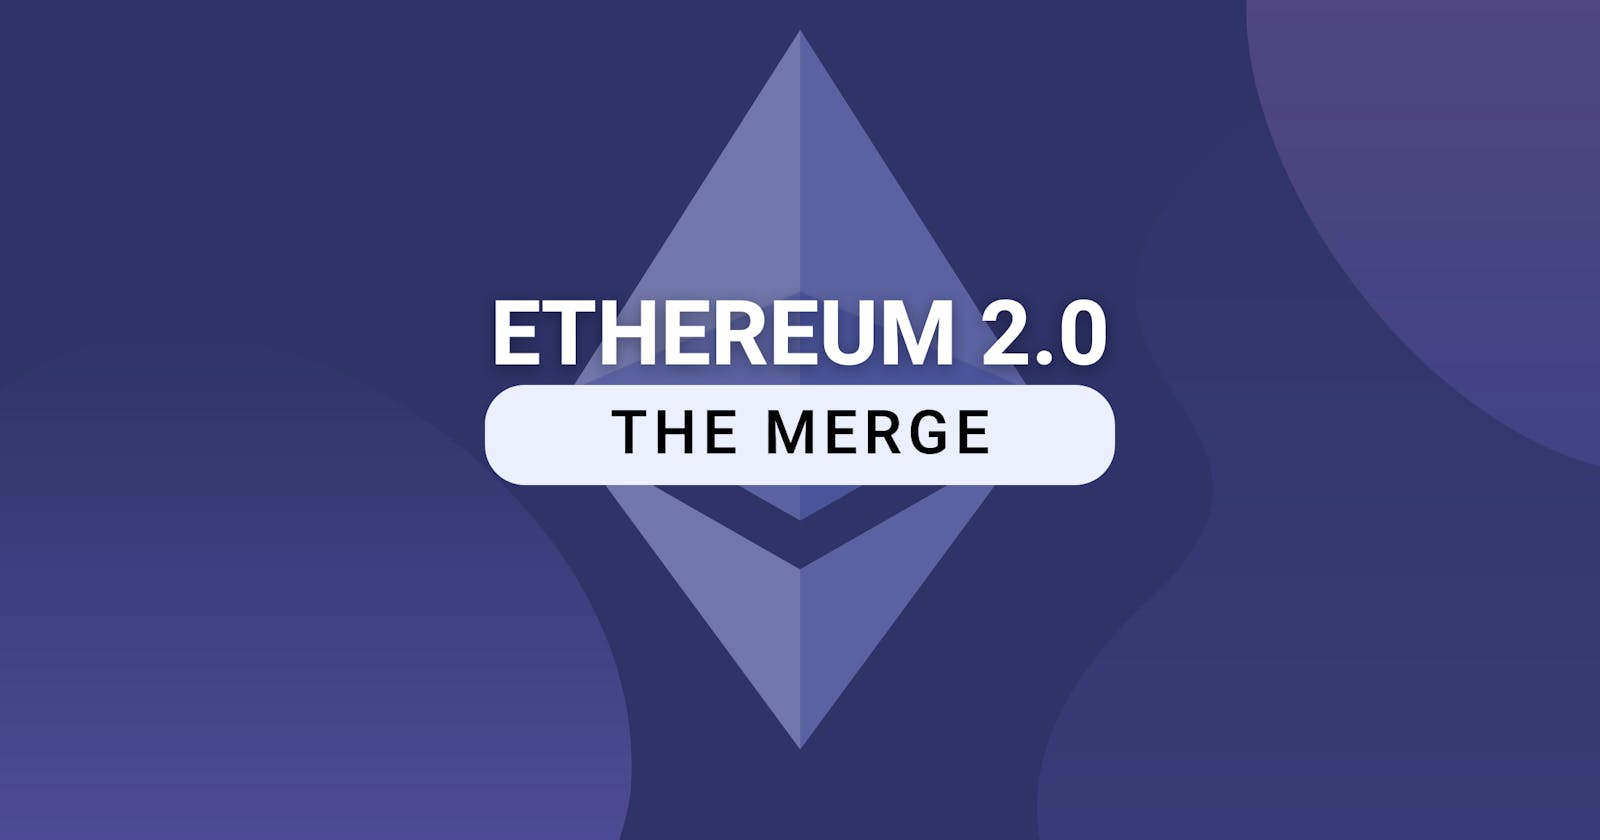 Ethereum Merge Explanation from 5 year kid to professional.